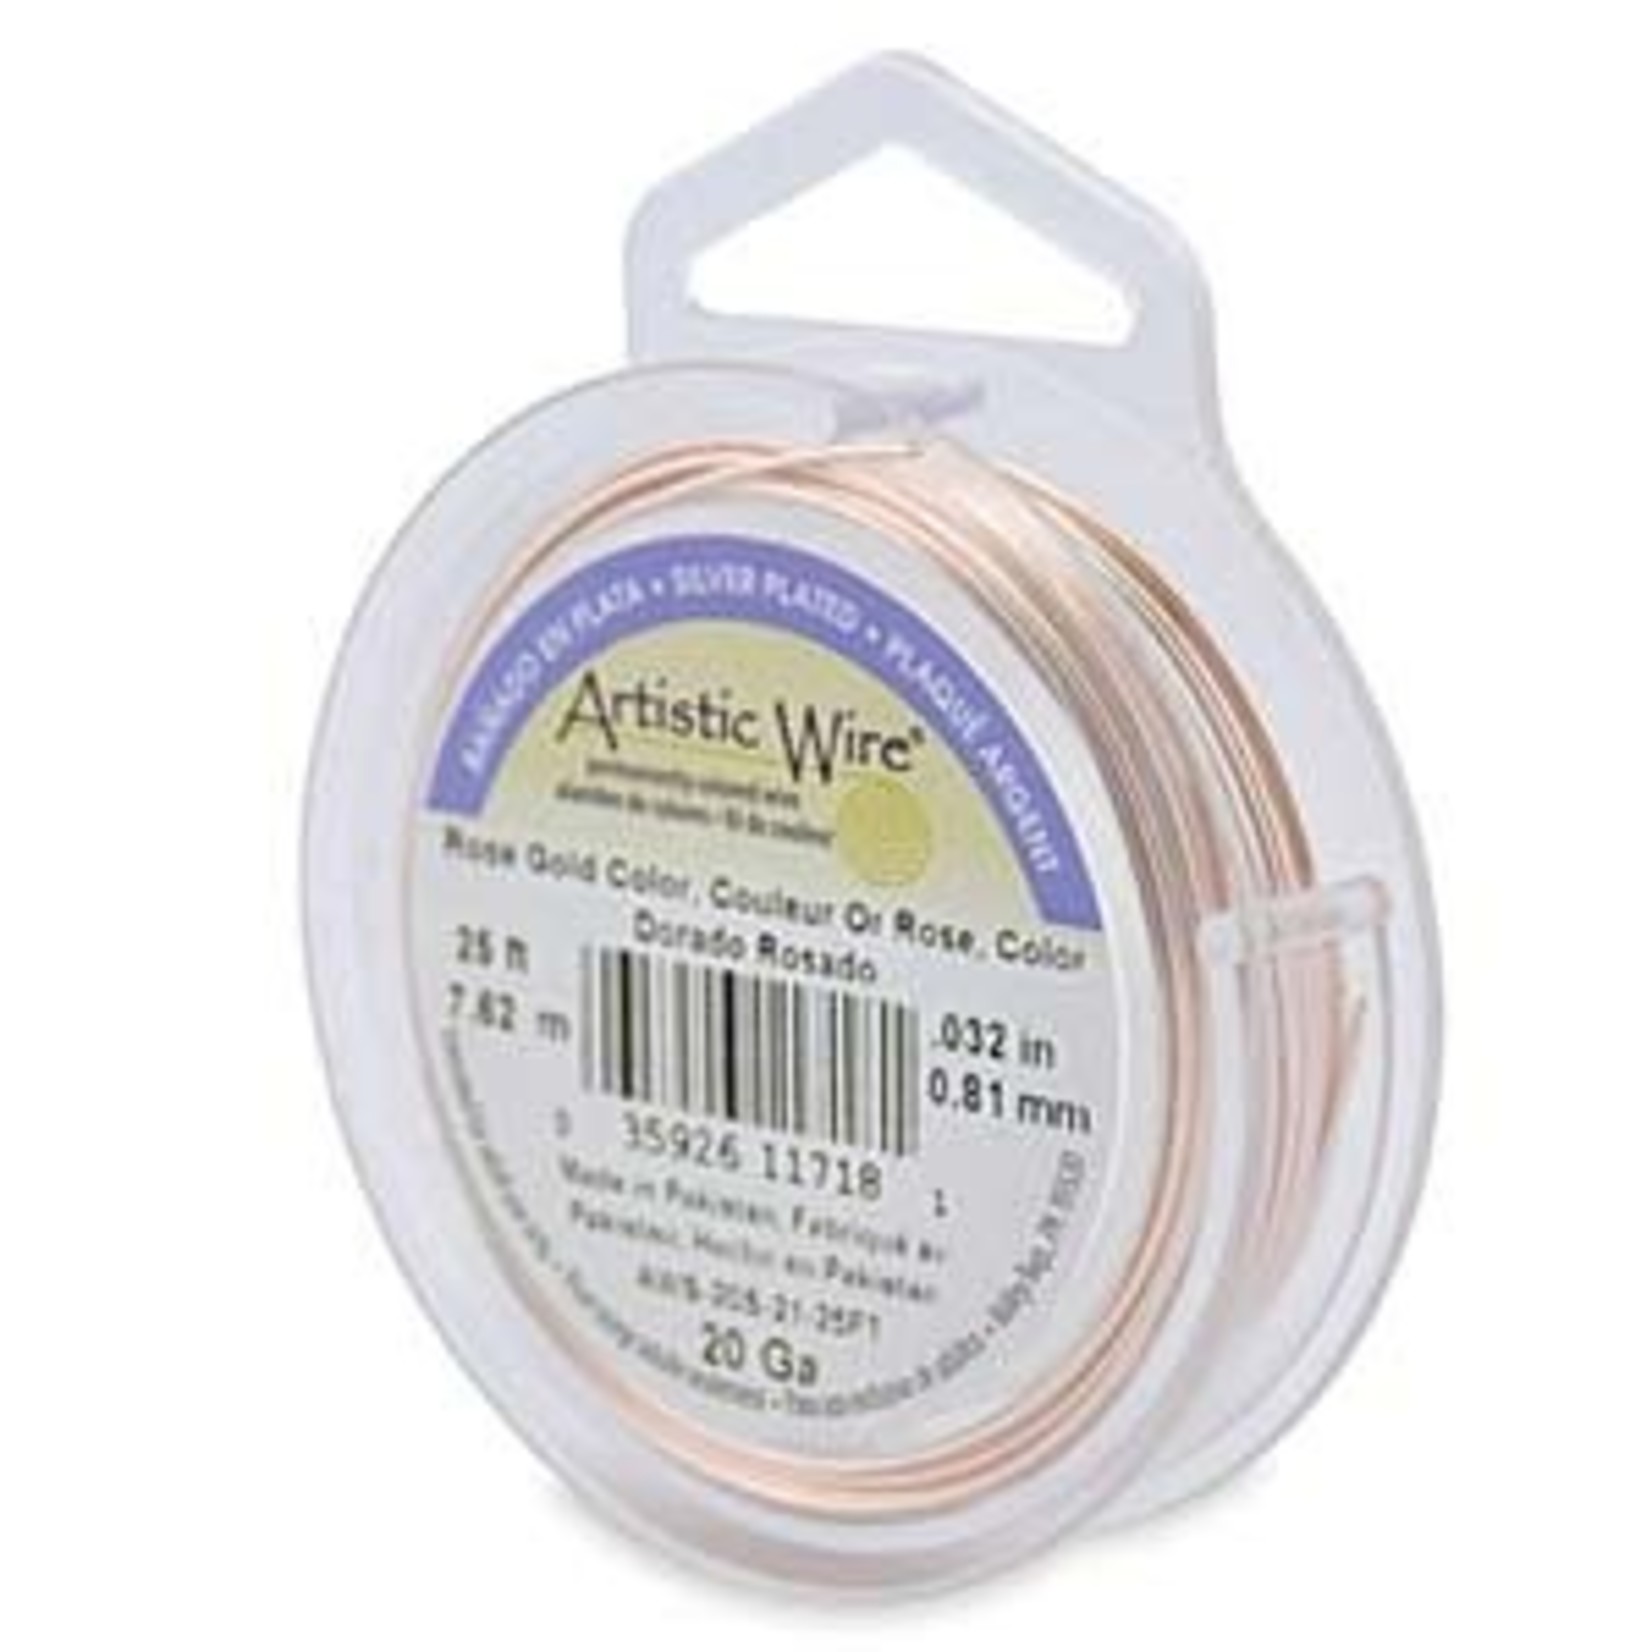 Artistic Wire Artistic Wire Rose Gold, 24 Gauge, 15 Yard Spool